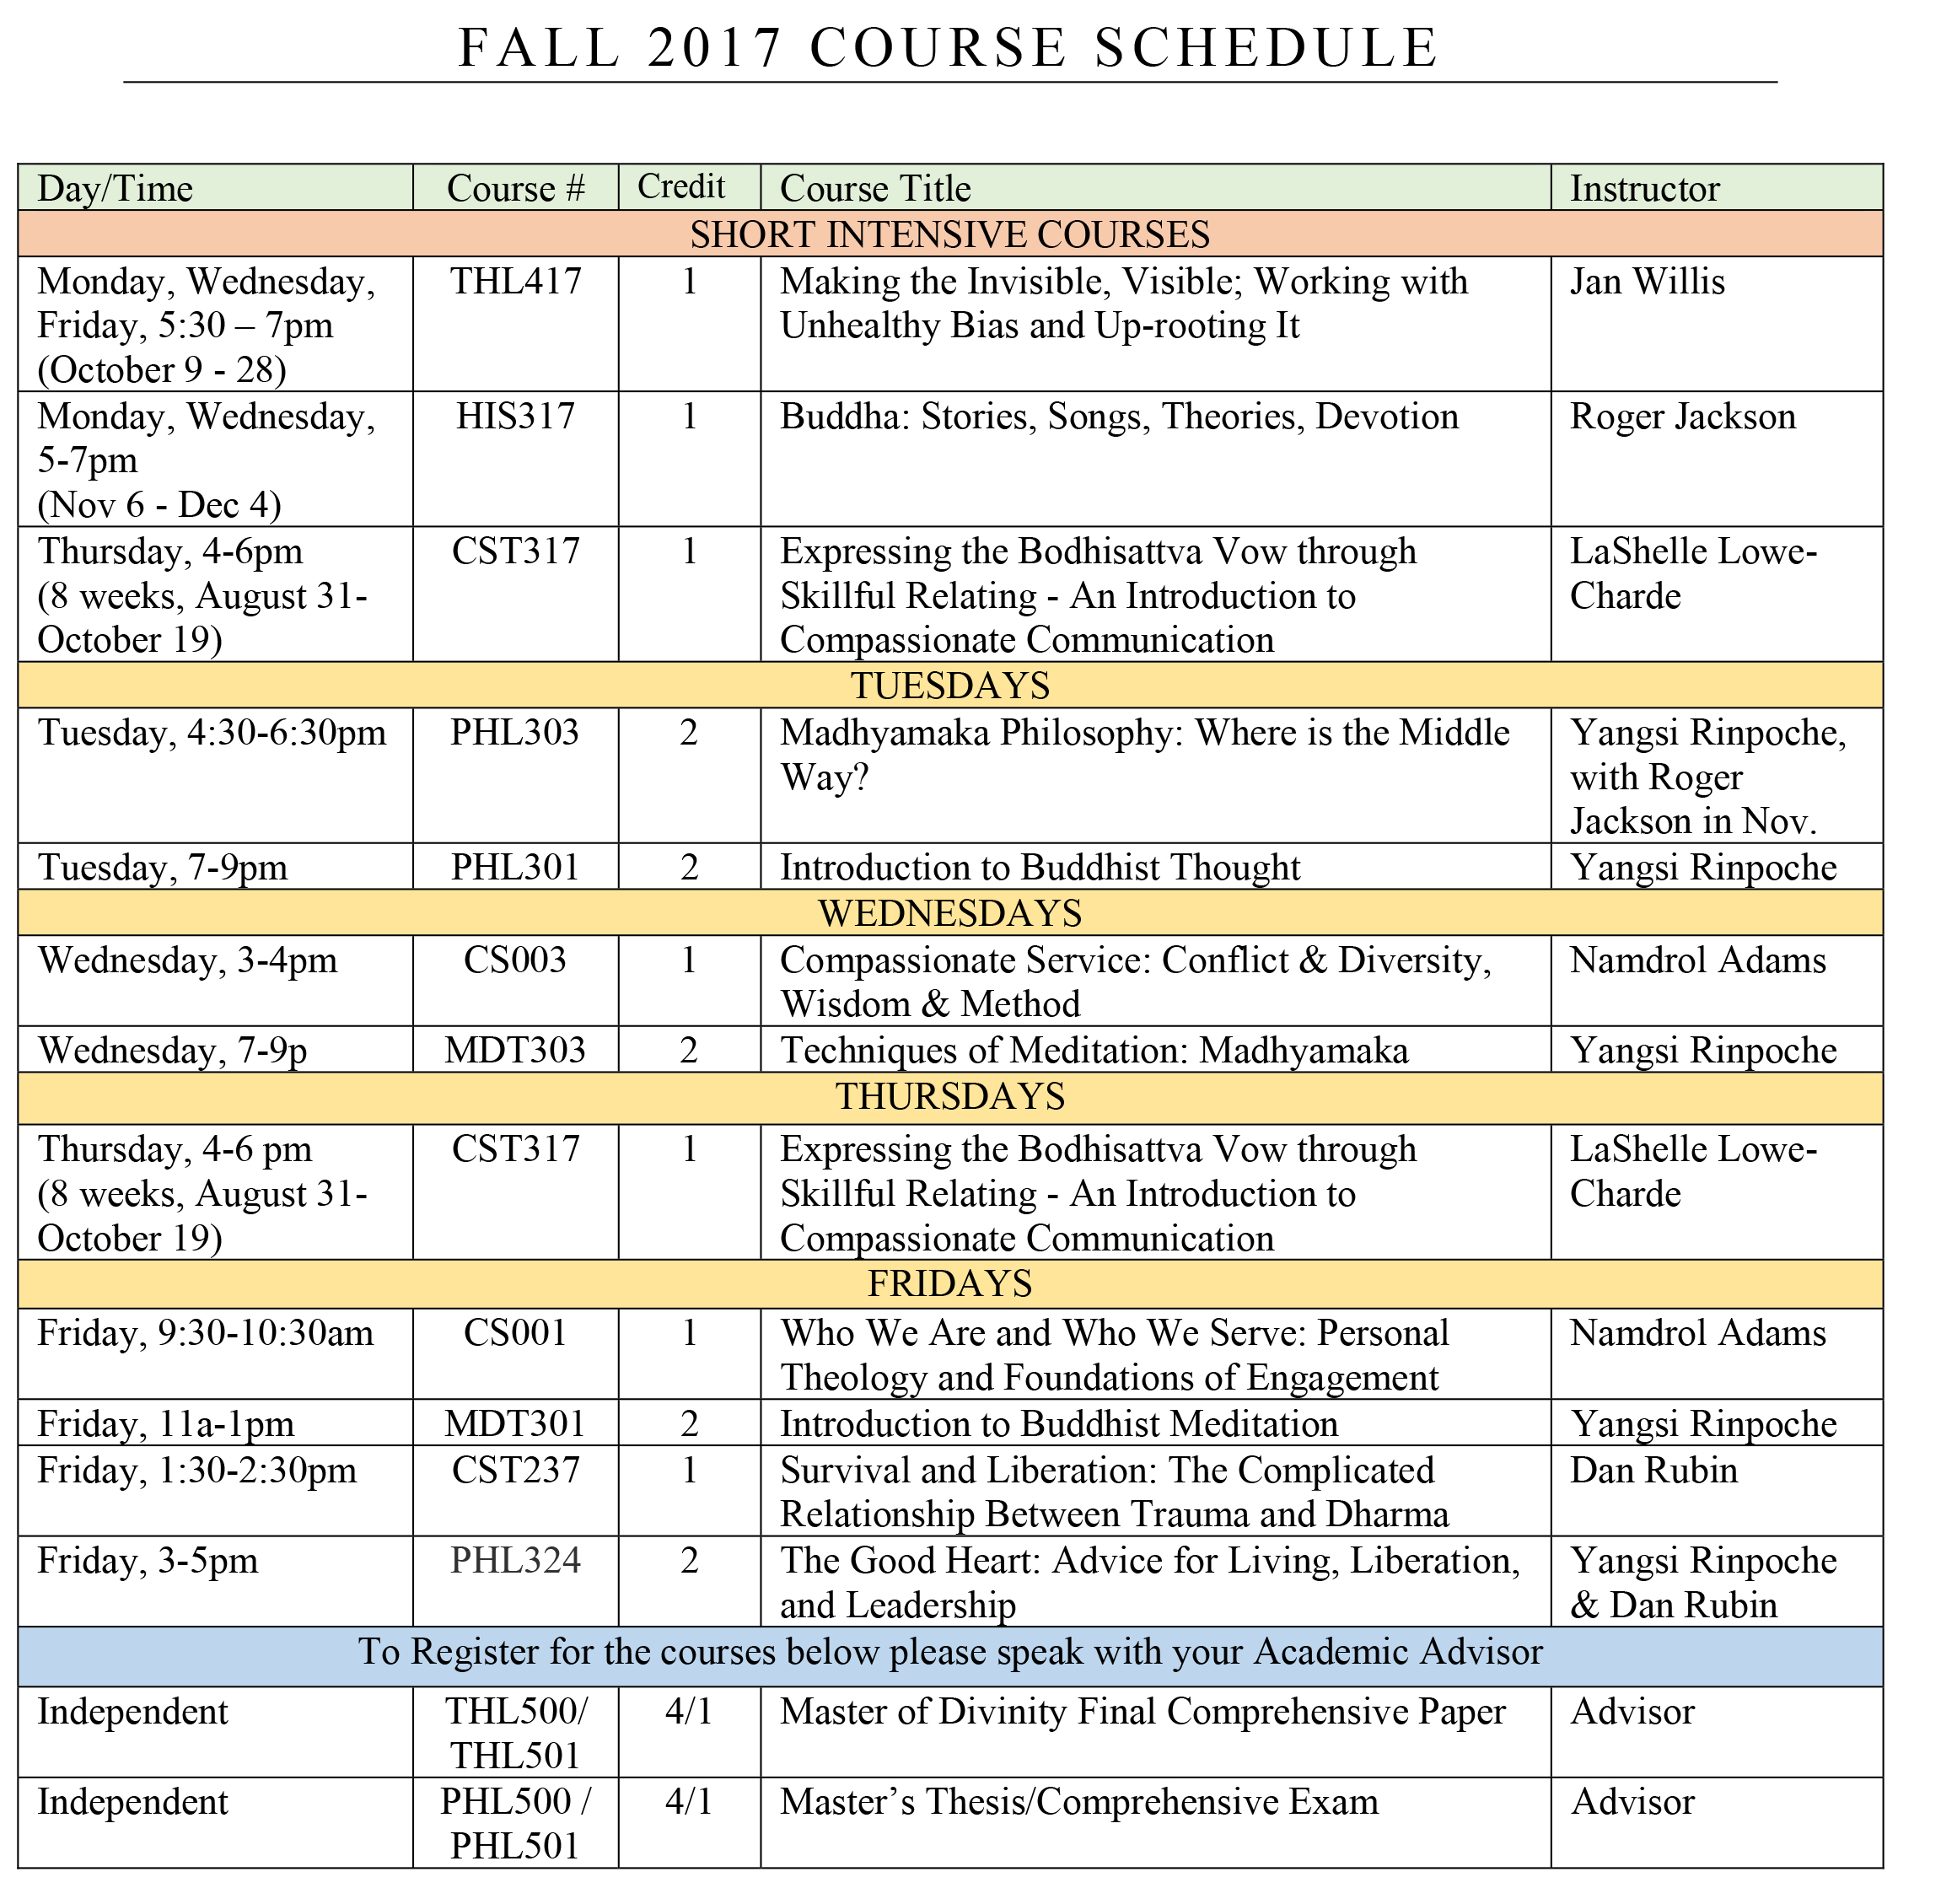 FALL 2017 COURSE SCHEDULE 